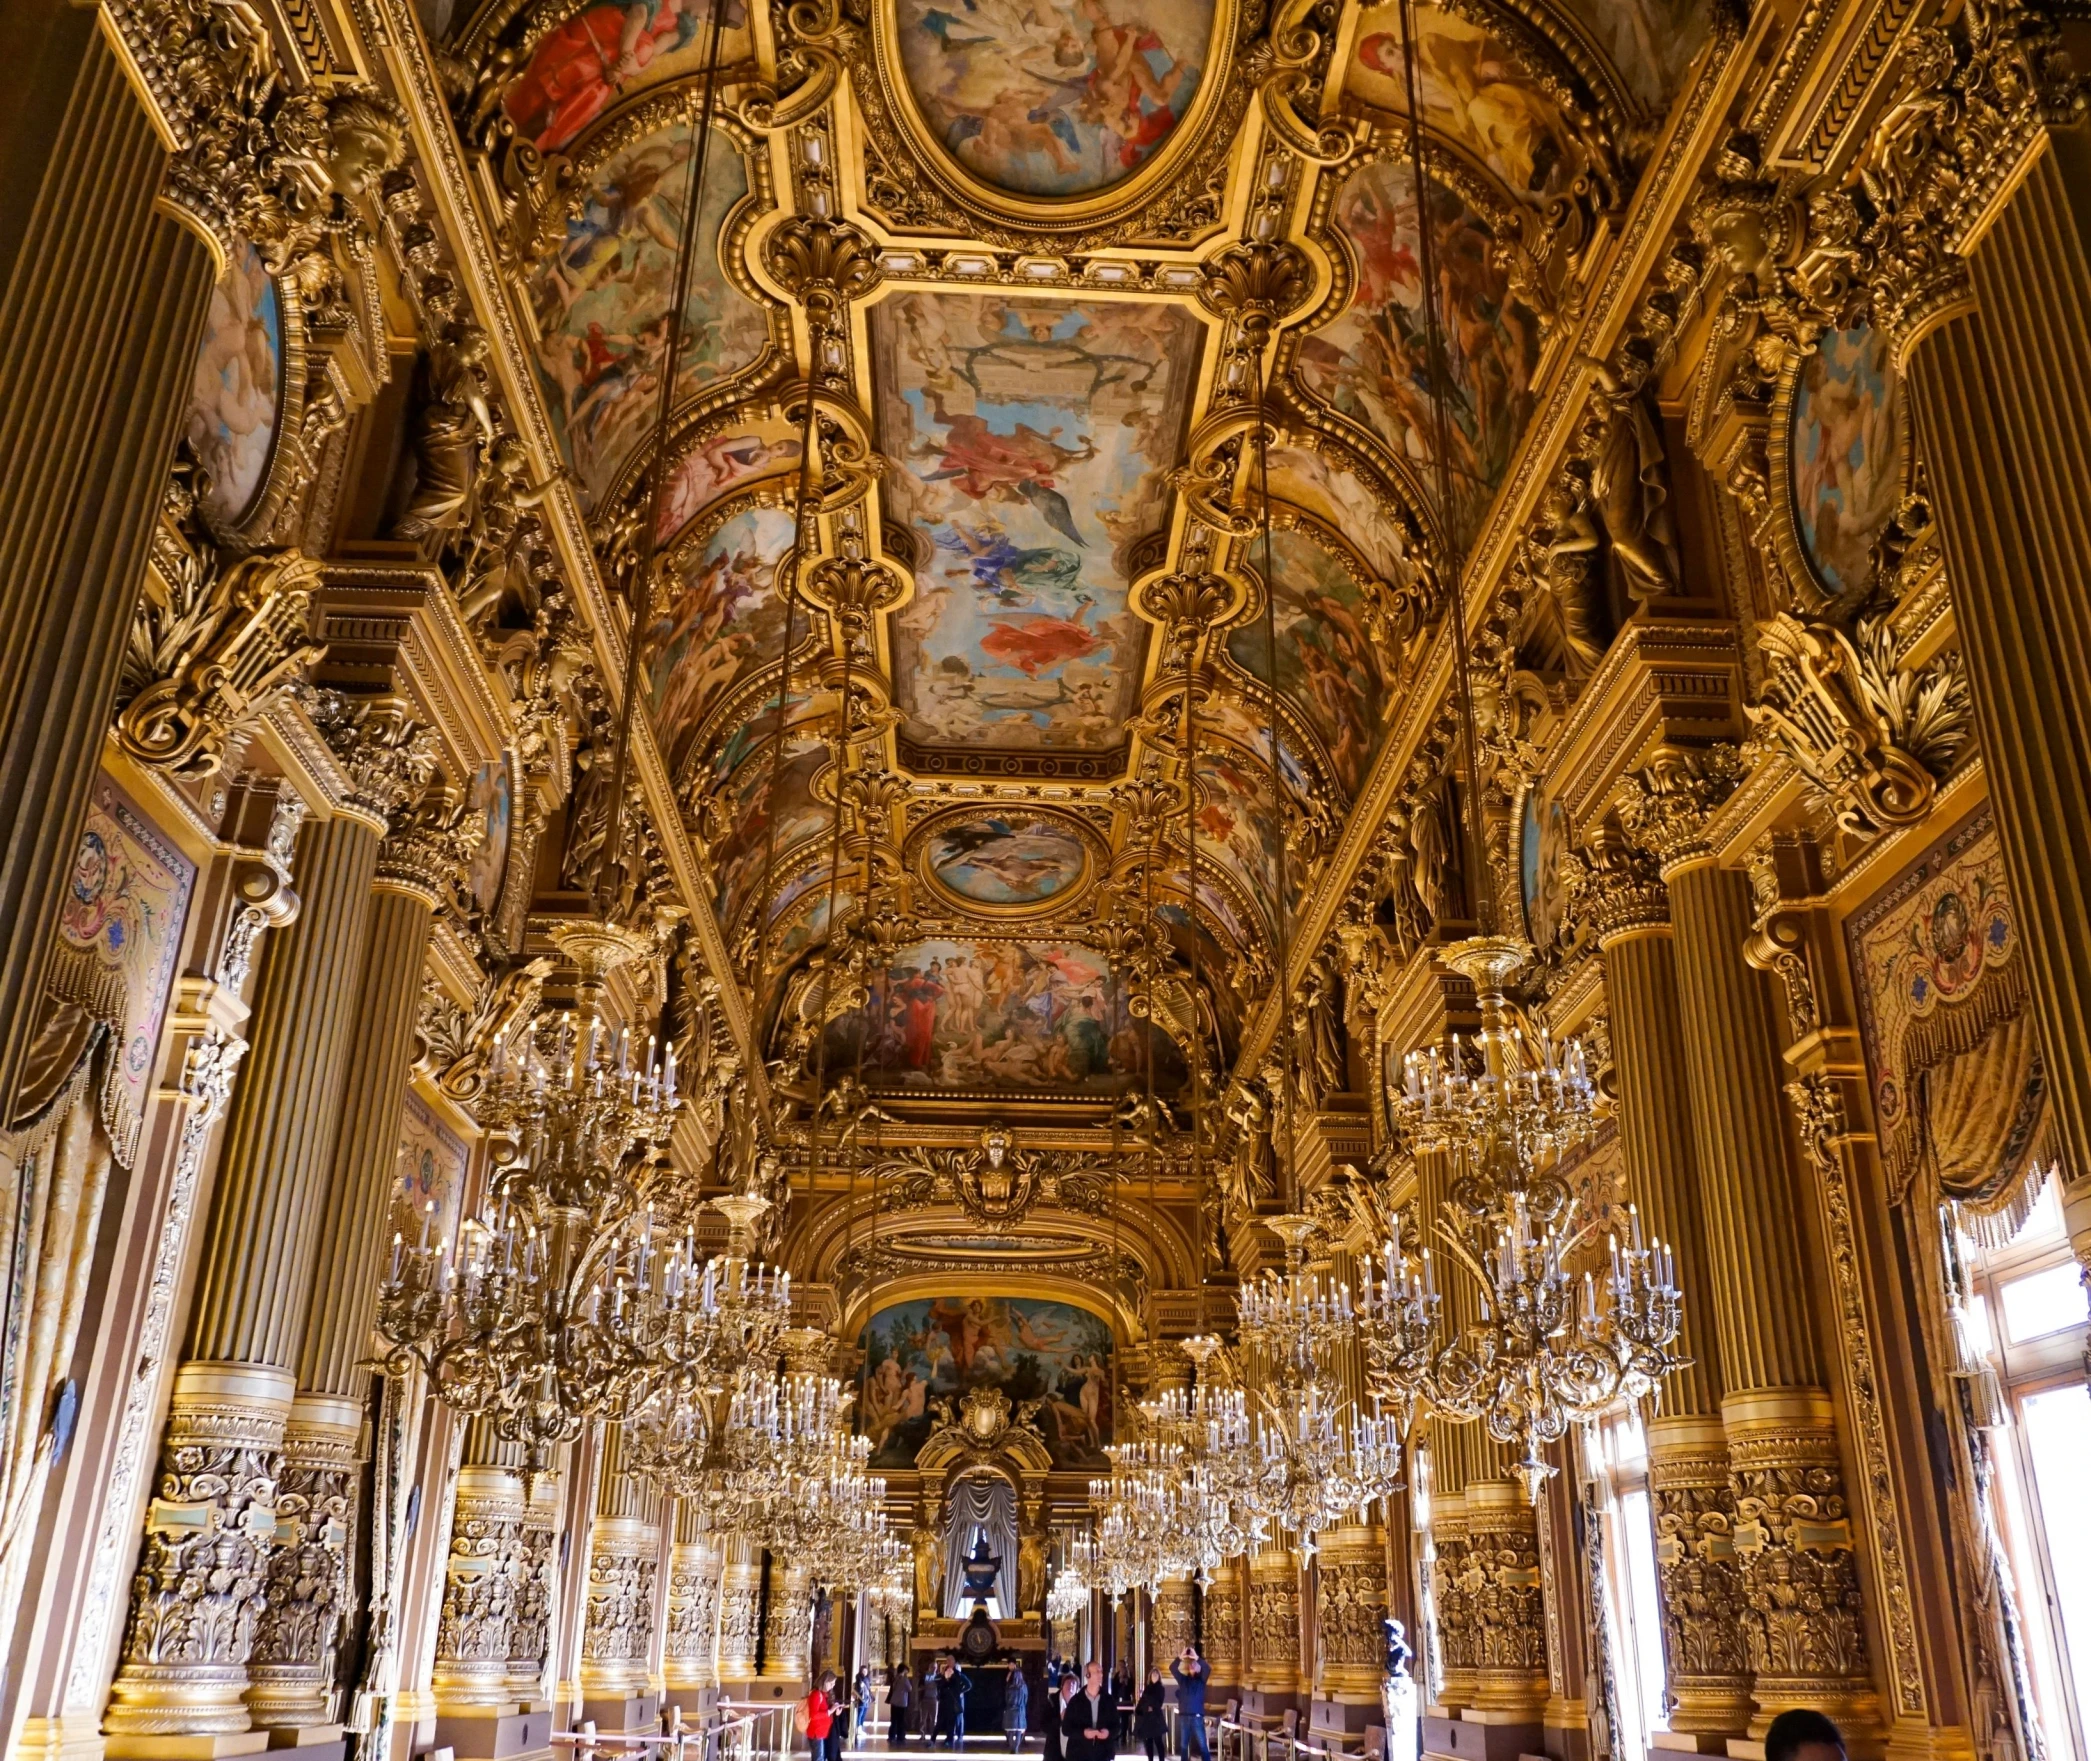 an ornate gold painted building with large chandeliers and artwork on the ceiling